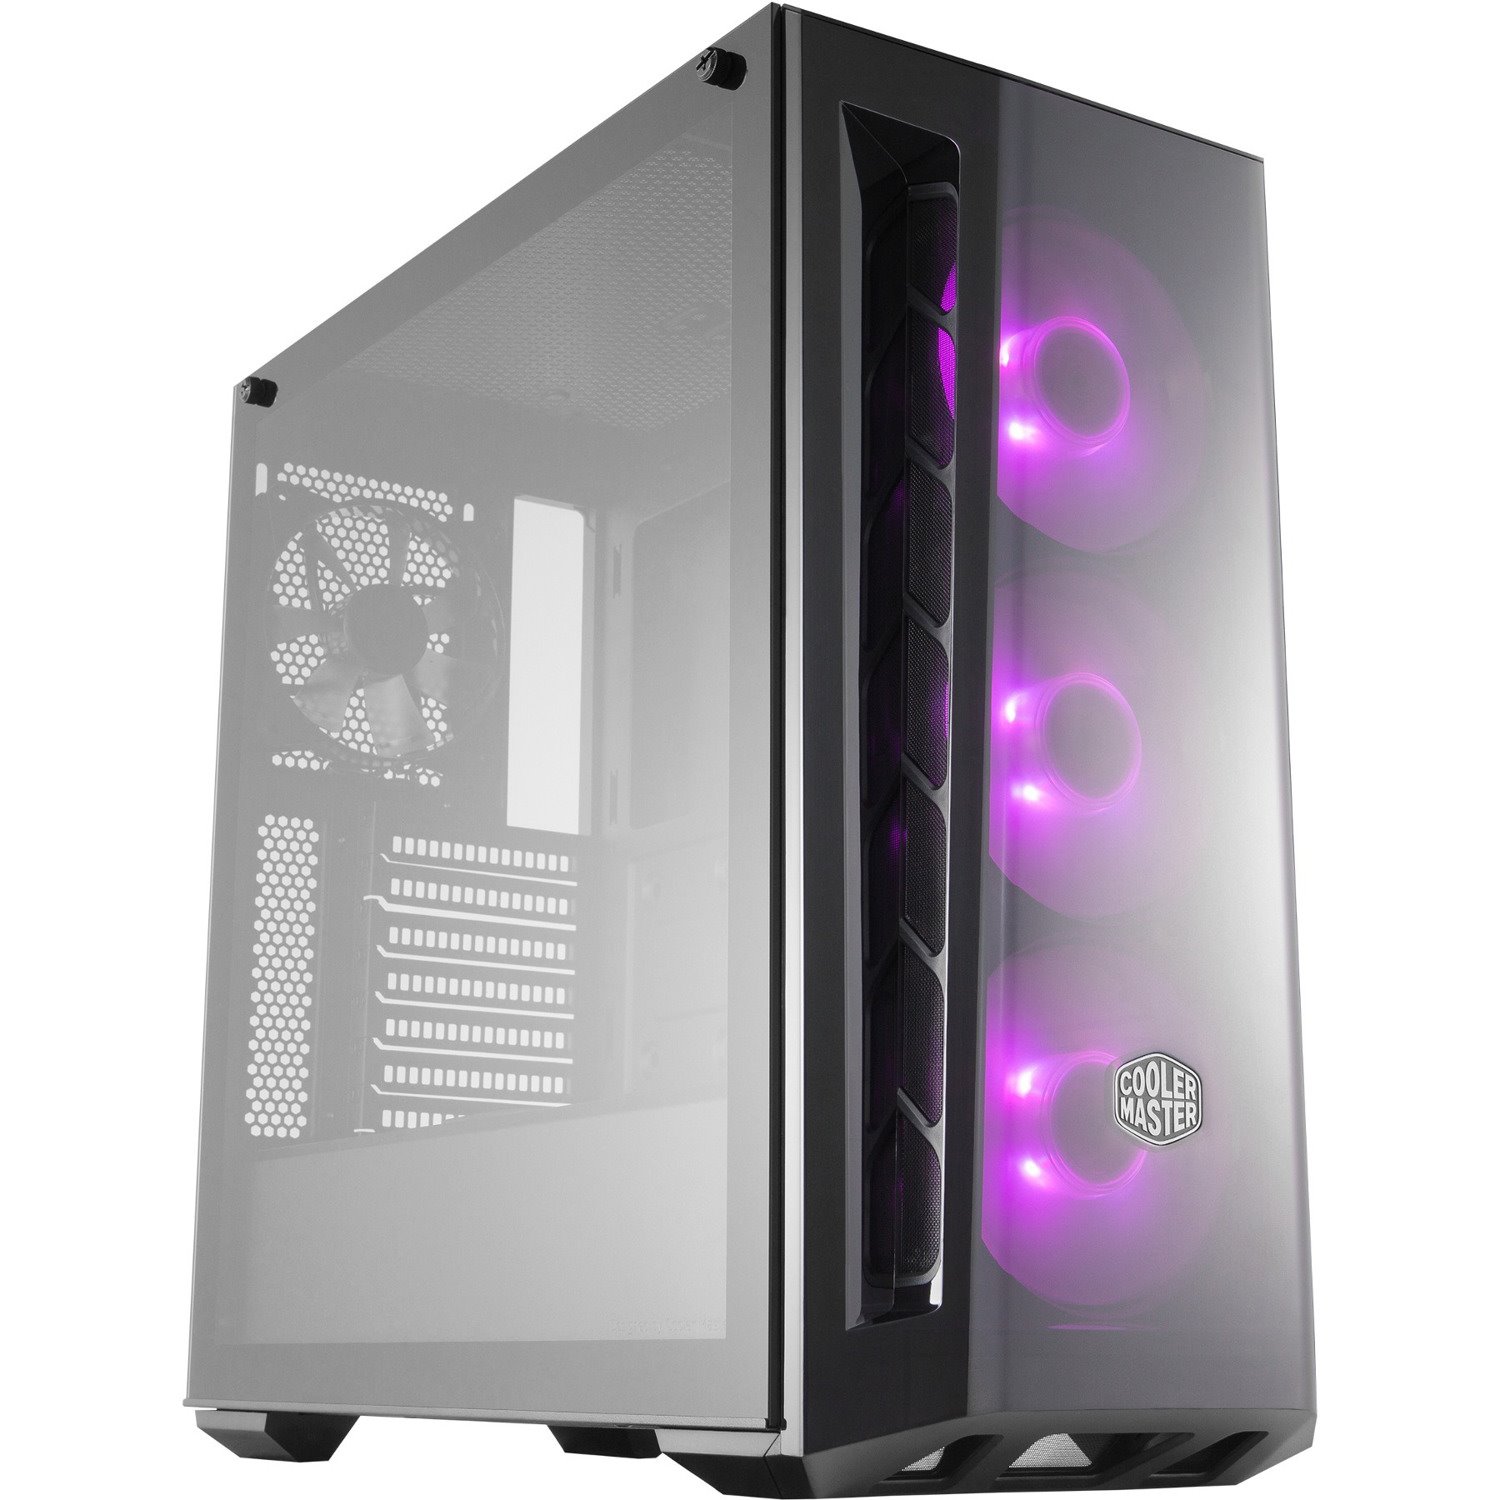 Cooler Master MasterBox MB520 RGB Computer Case - ATX, Micro ATX, Mini ITX Motherboard Supported - Mid-tower - Steel, Plastic, Tempered Glass - Black